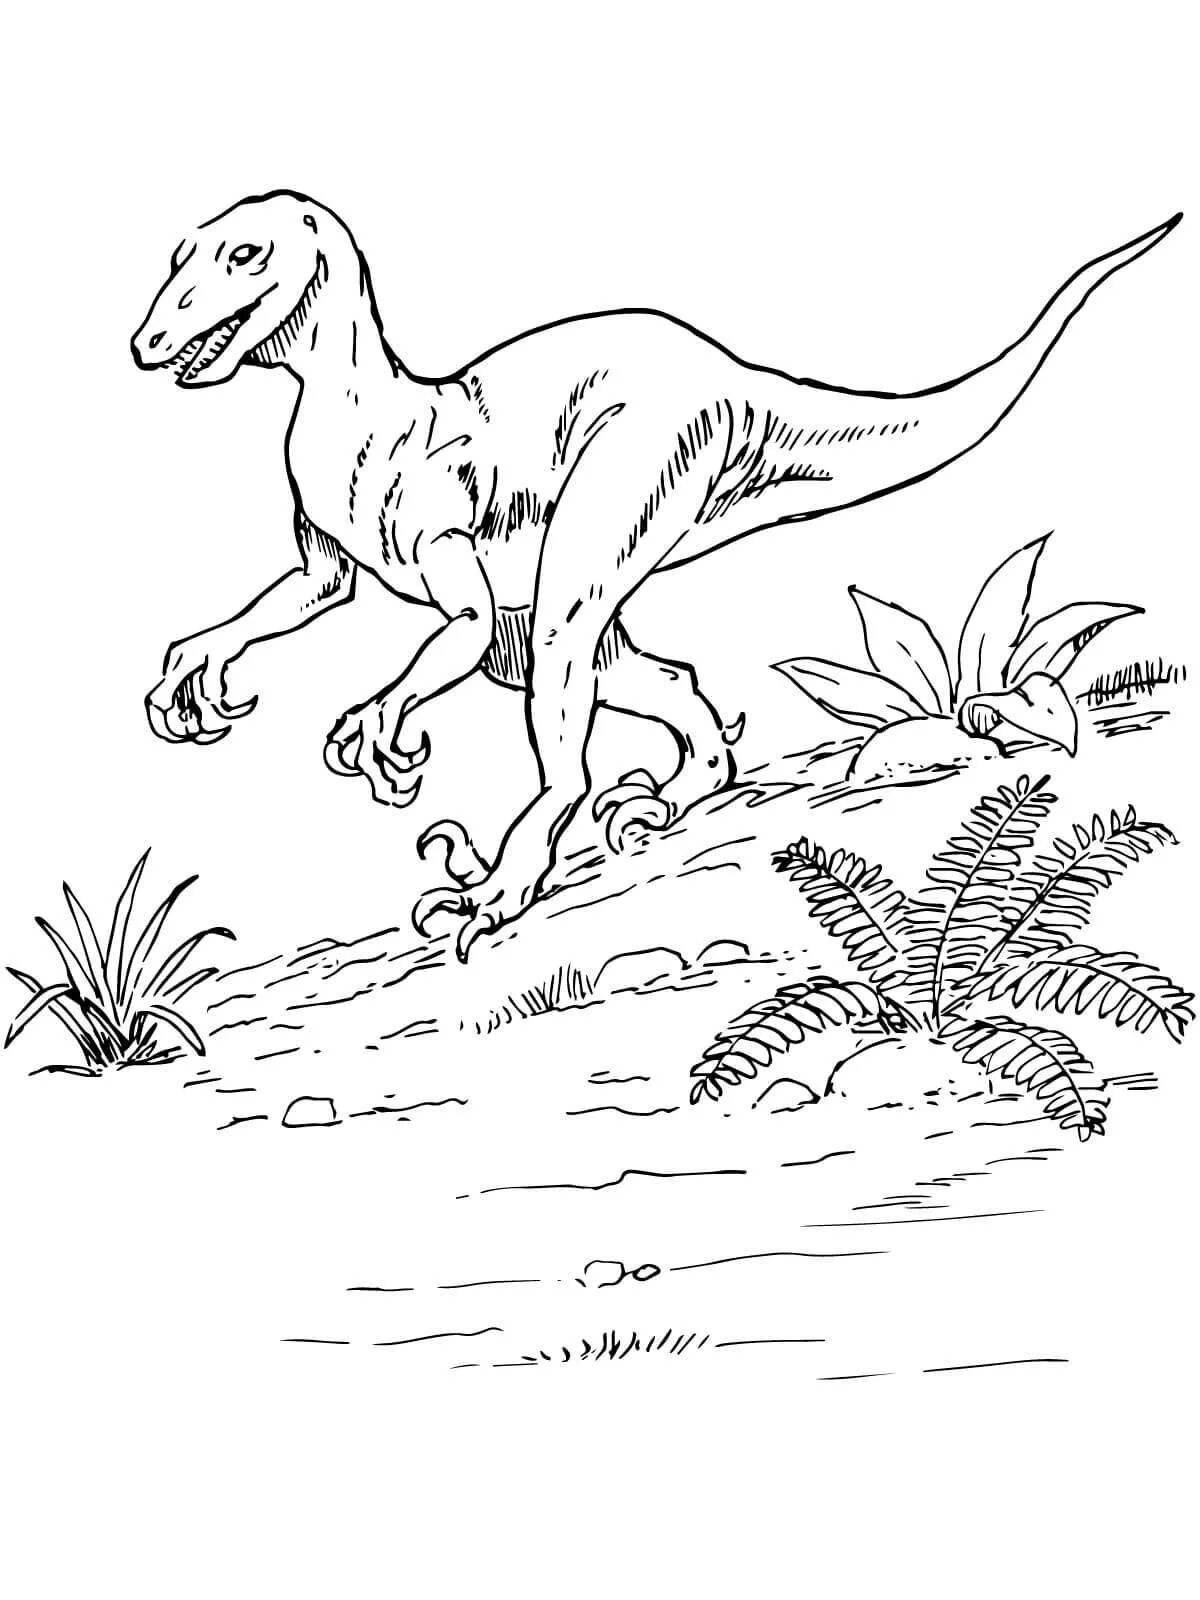 Coloring page delightful gallimimus